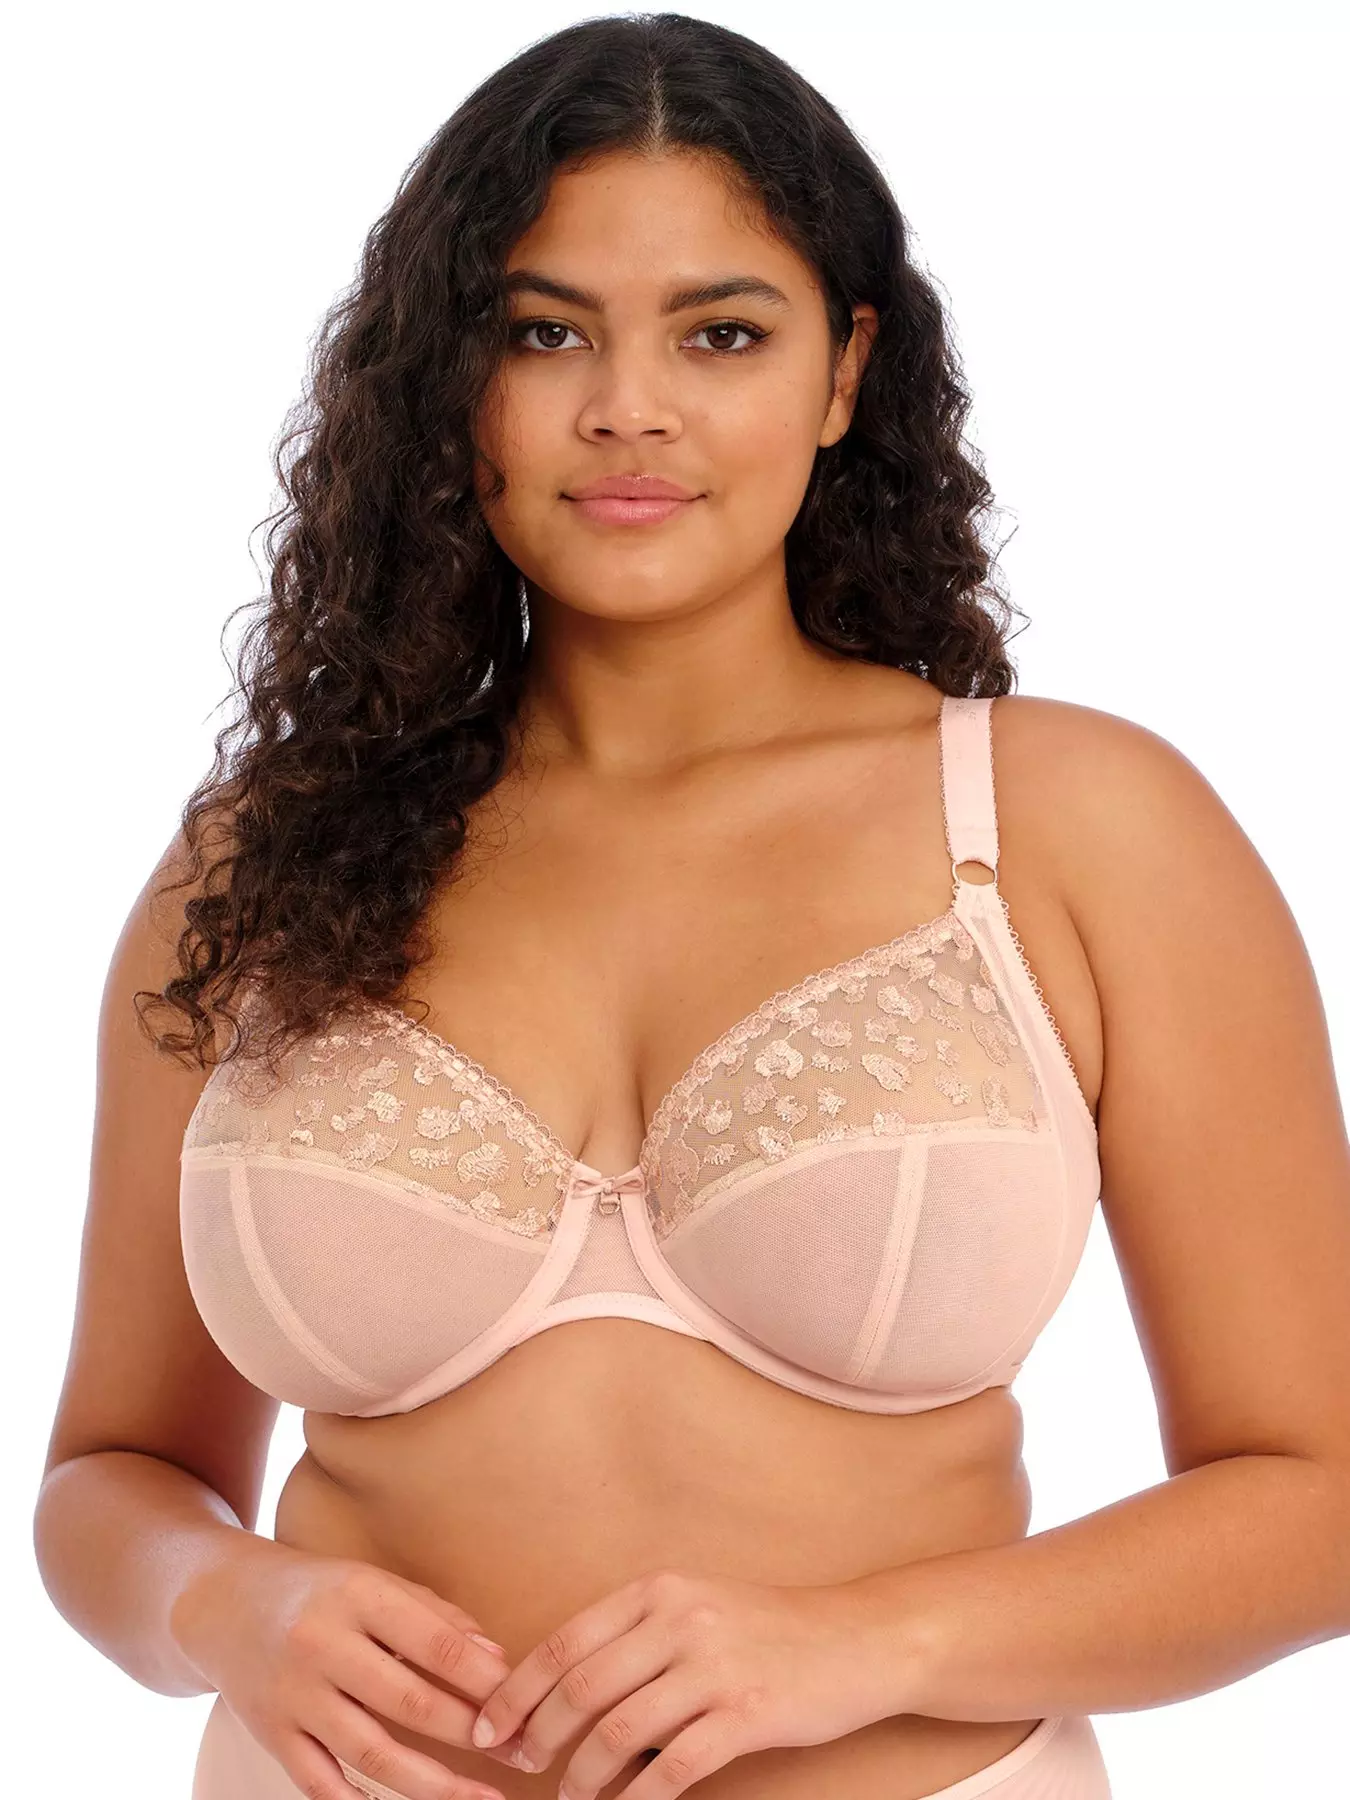 34G Bra Size in G Cup Sizes Jet by Elomi Convertible, Larger Cup and Three  Section Cup Bras